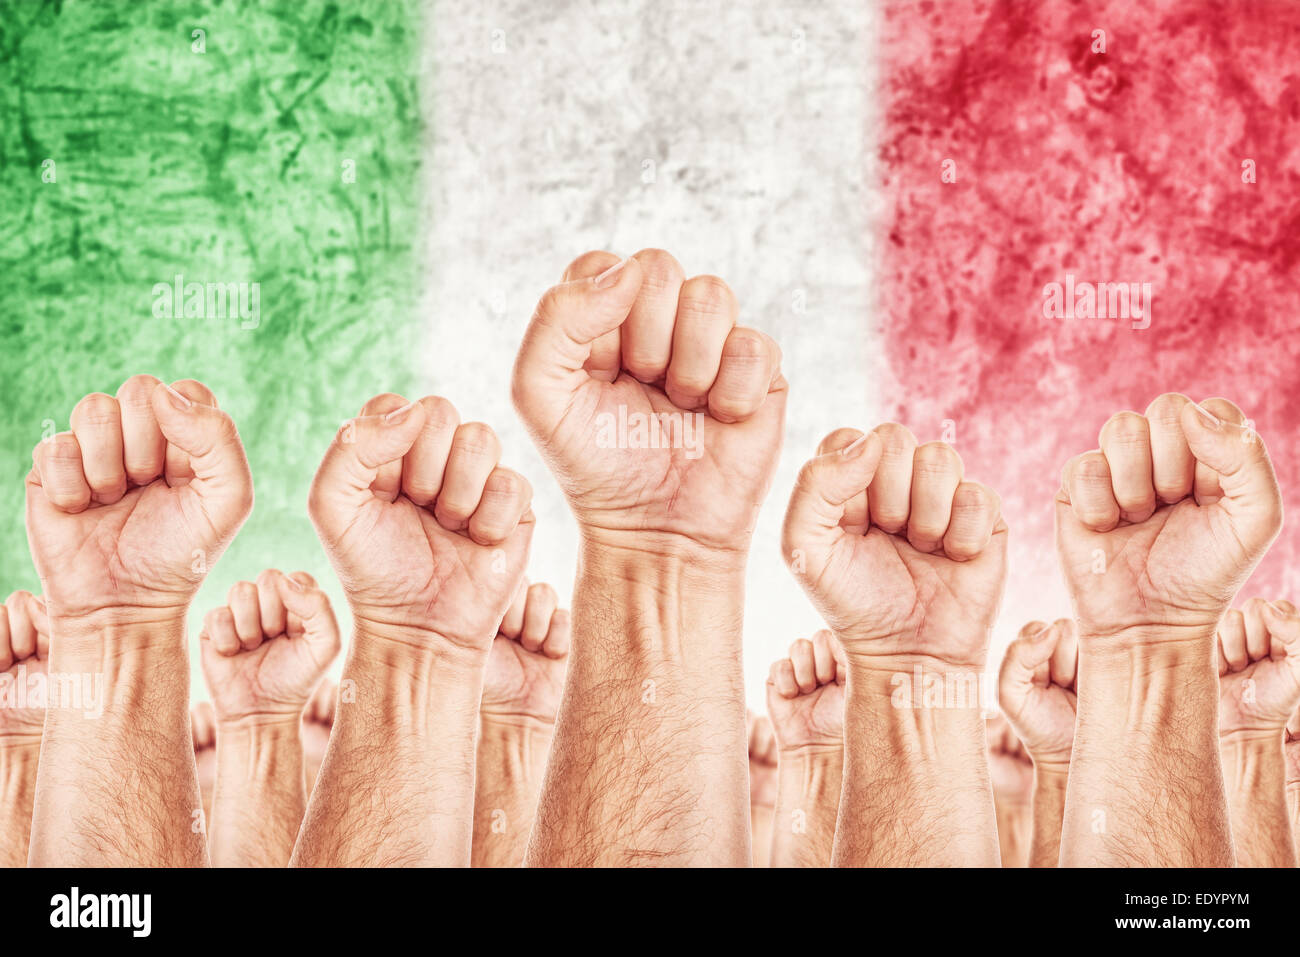 Italy Labor movement, workers union strike concept with male fists raised in the air fighting for their rights Stock Photo